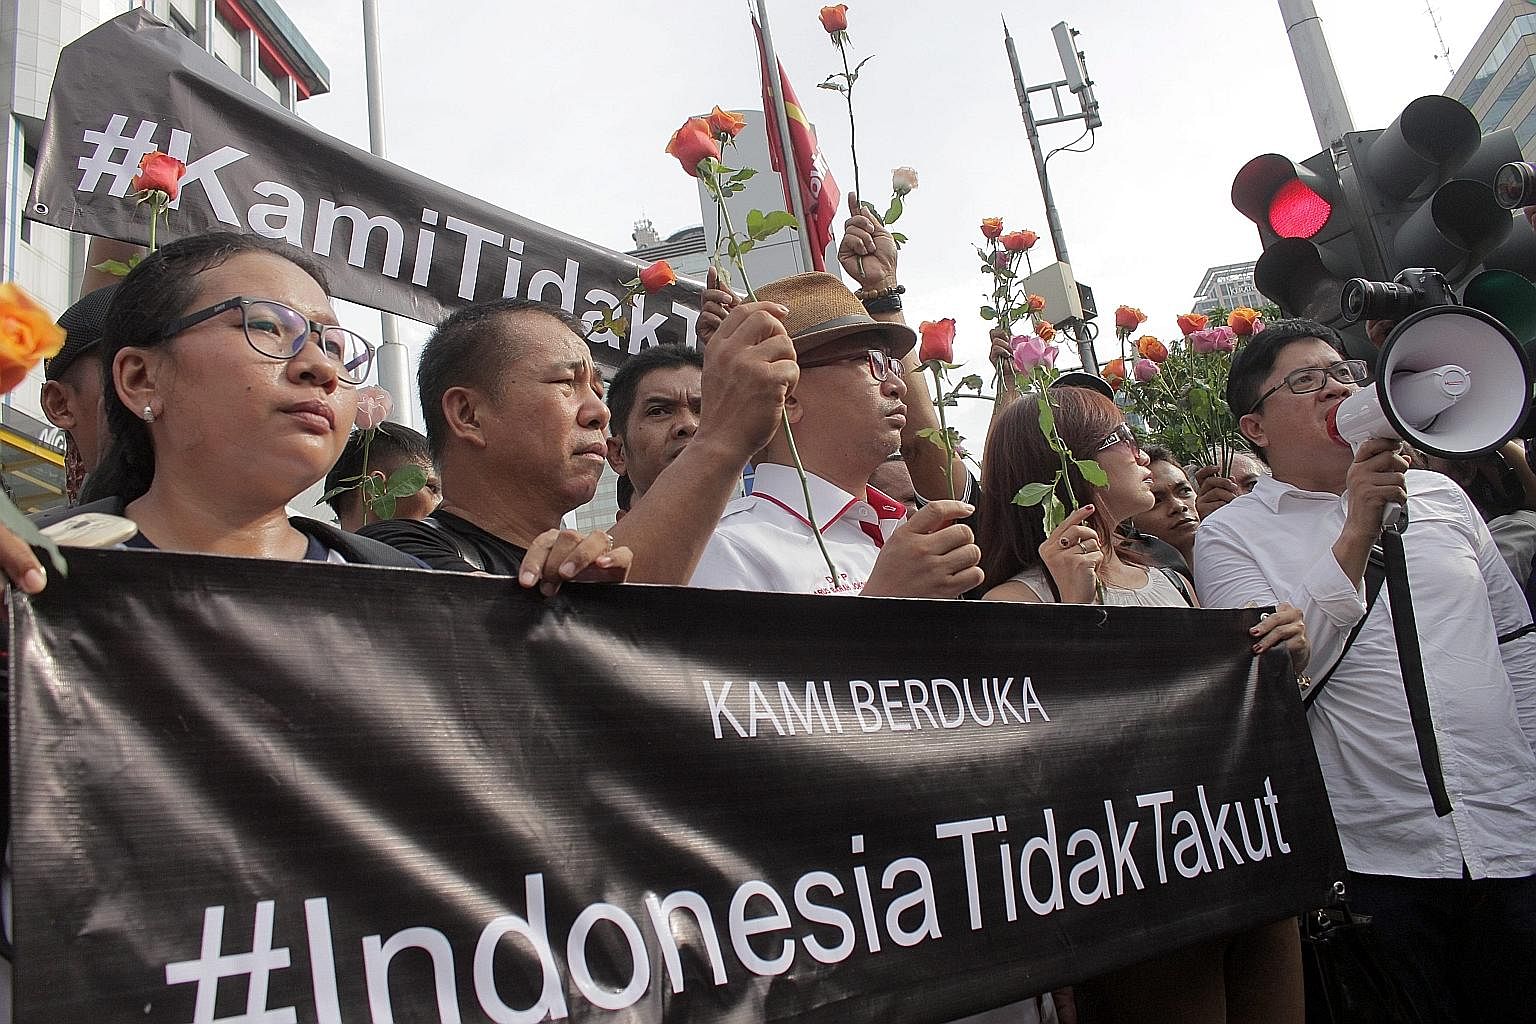 Activists holding a banner last Friday that said "Indonesia is not afraid" at the site of a bombing in Jakarta. The day before, local militants had launched an assault in downtown Jakarta, which left seven dead.